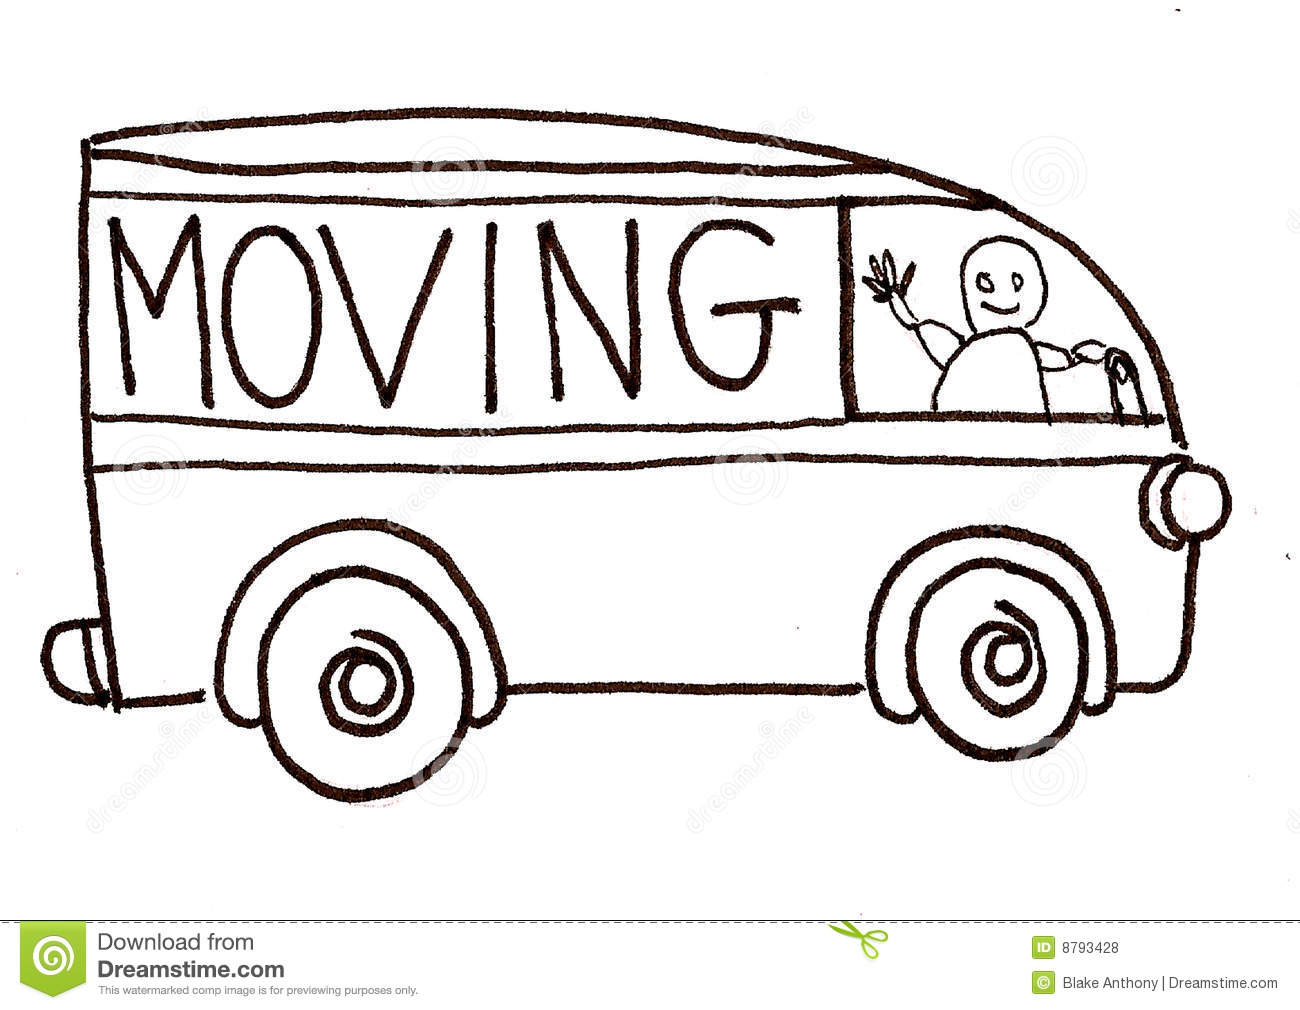 Moving Truck Clip Art Black and White